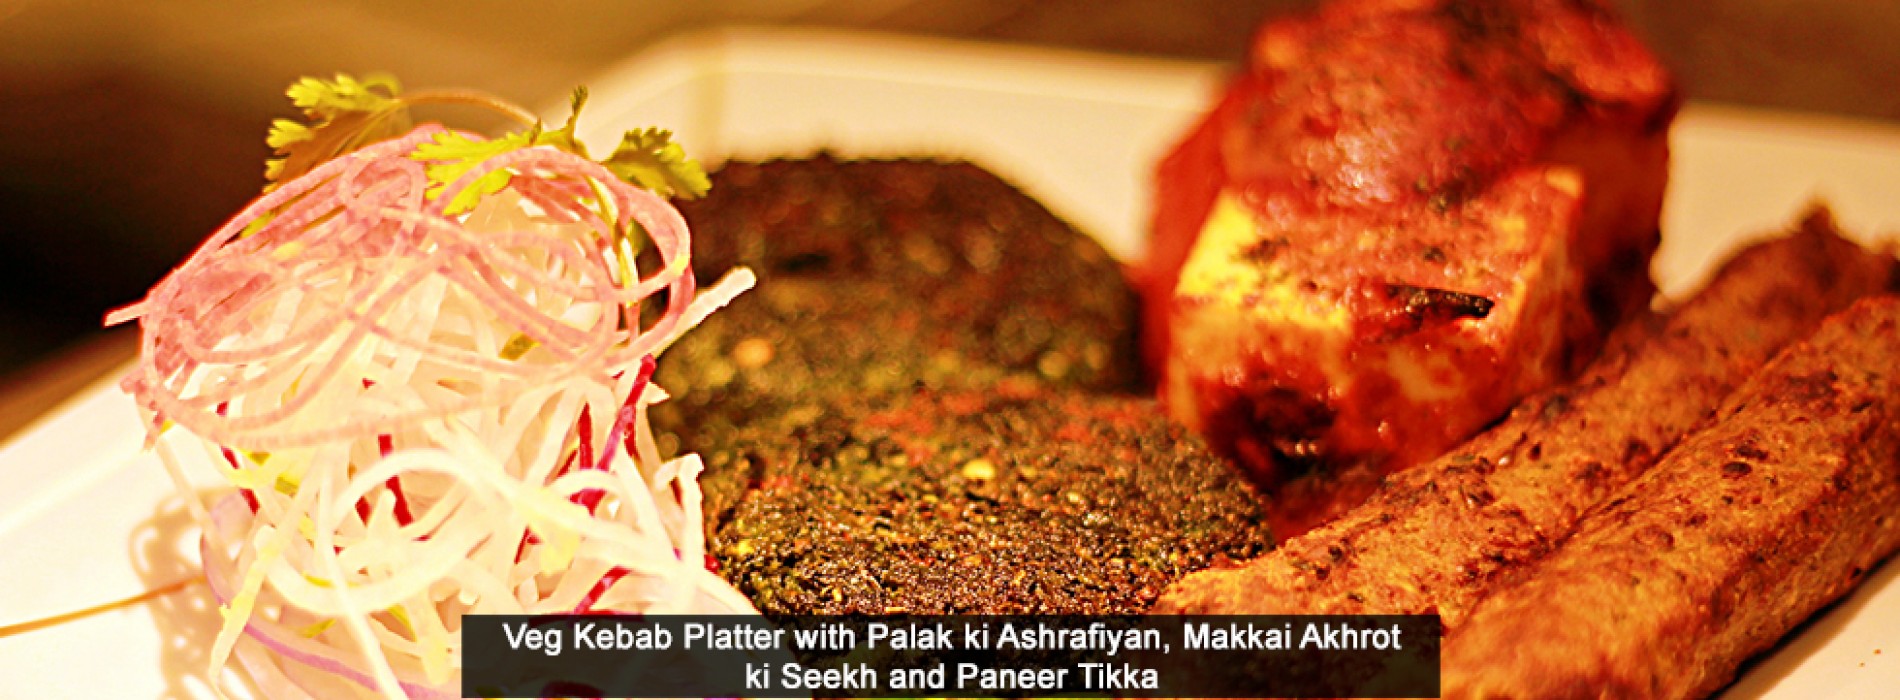 Indulge in Awadhi Cuisine @ The Leela Ambience Convention Hotel, Delhi